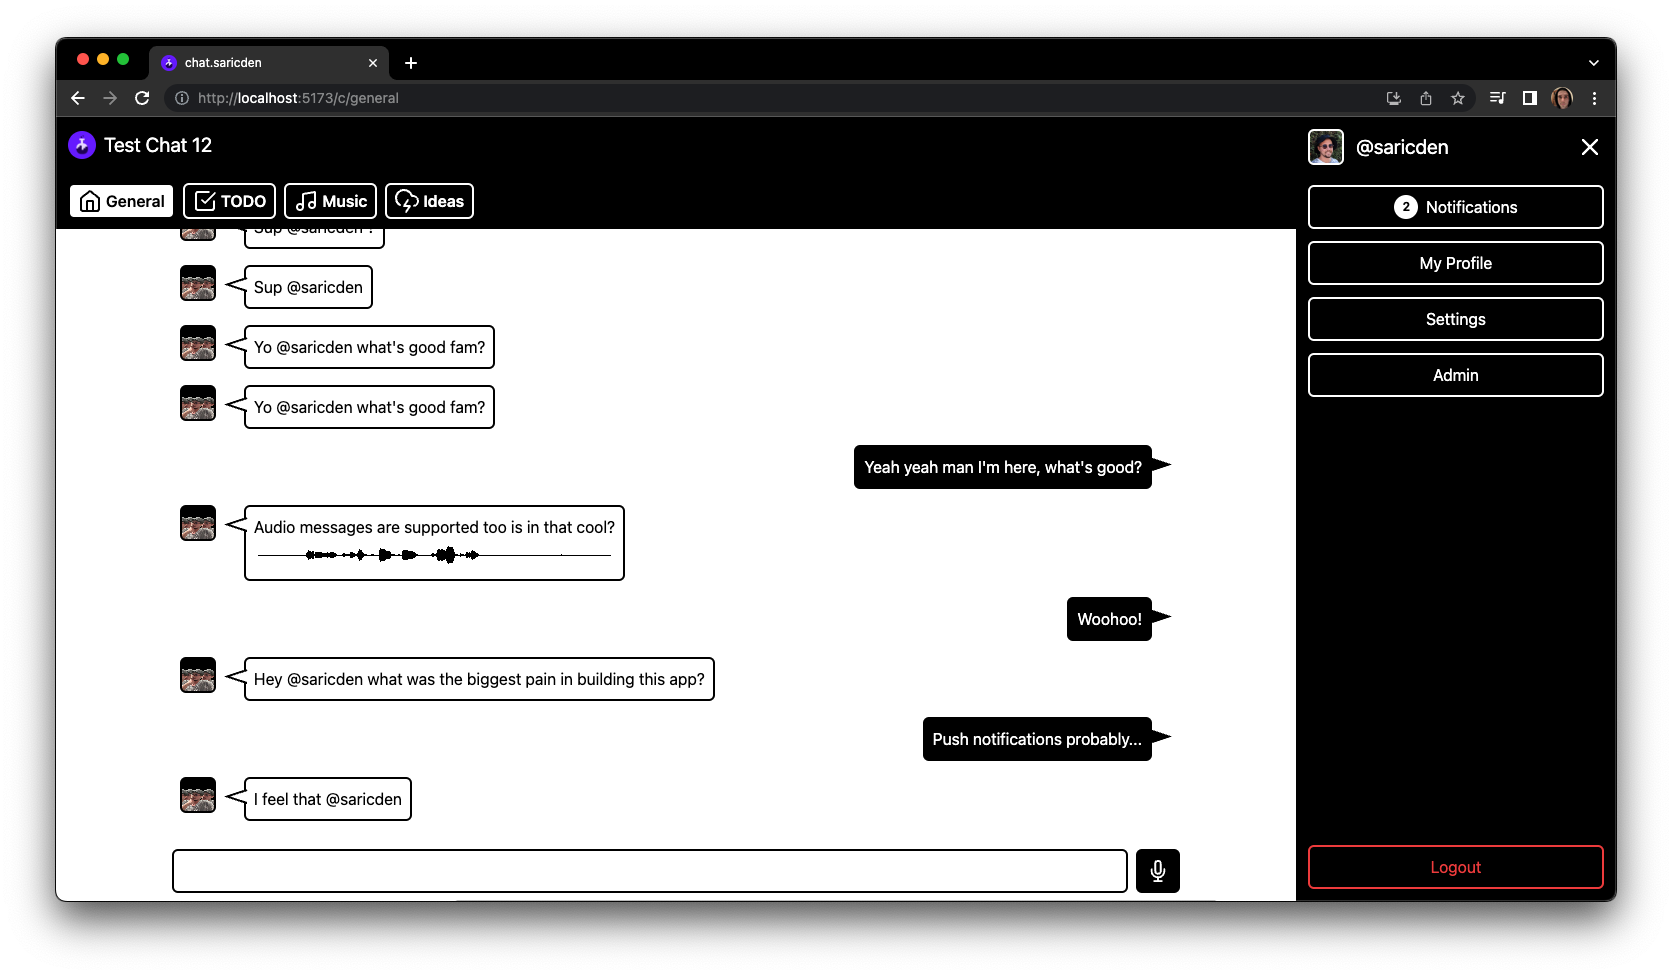 A screenshot of a freshly generated chat app, using the create-chat-app script.